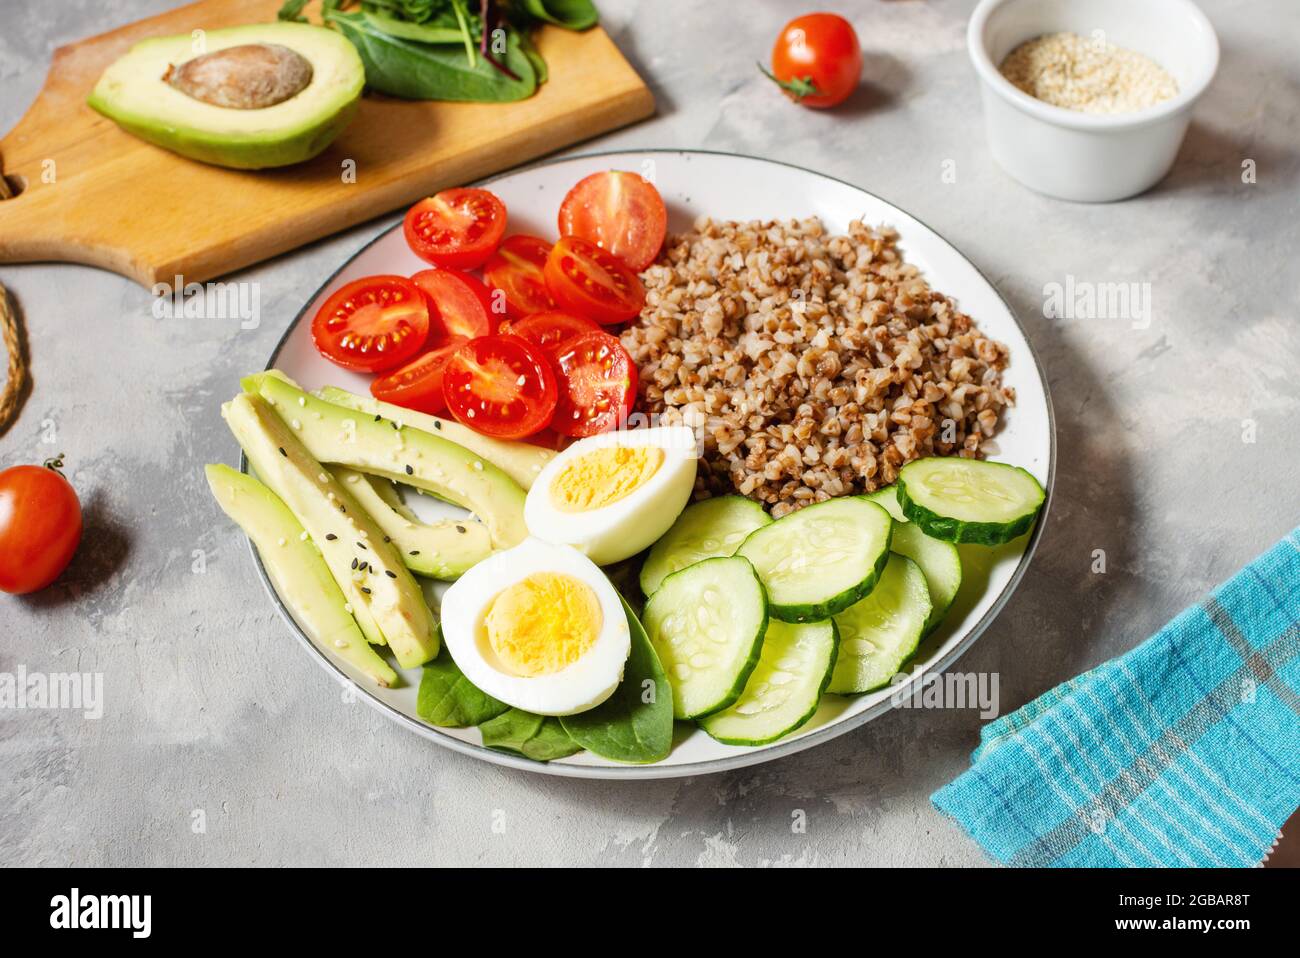 Vegan lunch bowl with avocado, egg, cucumber, tomato and buckwheat on a concrete background Stock Photo